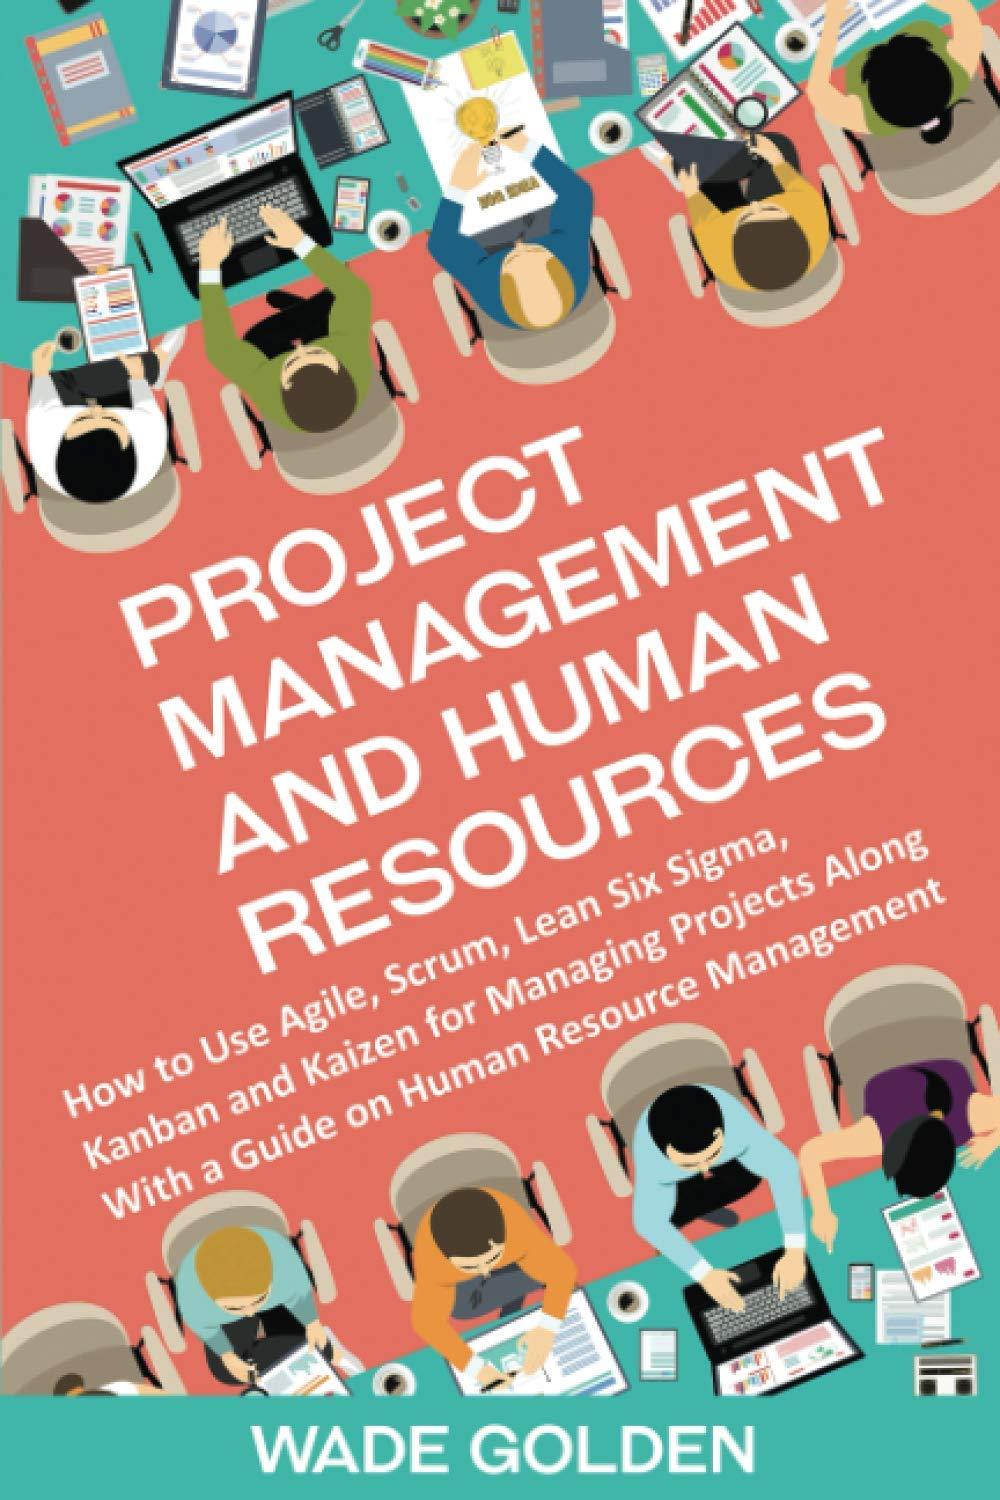 project management and human resources how to use agile scrum lean six sigma kanban and kaizen for managing